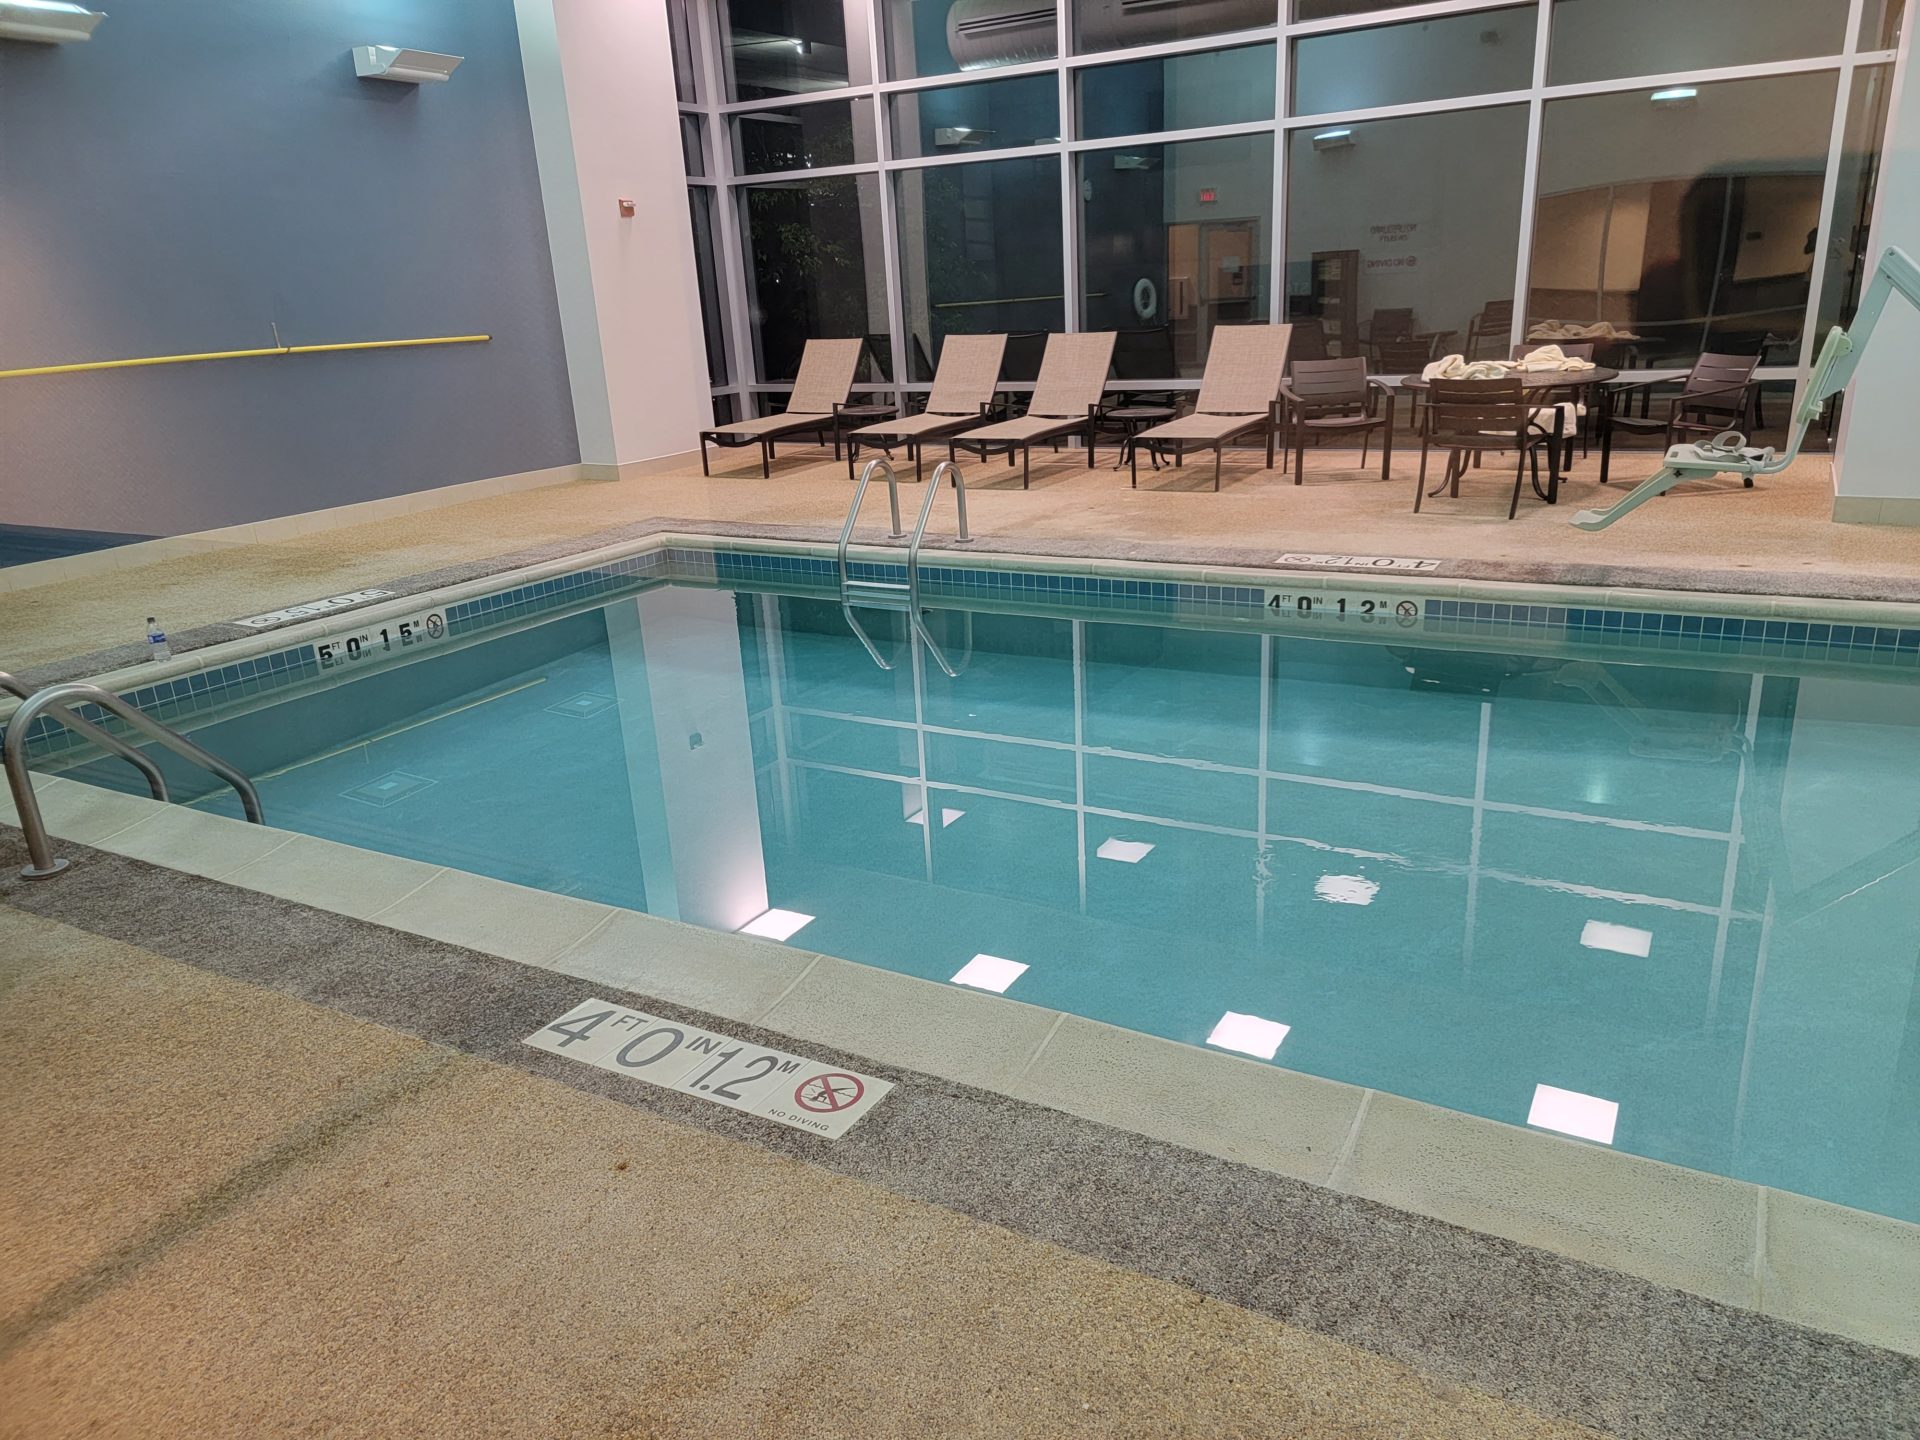 a pool with chairs in the background